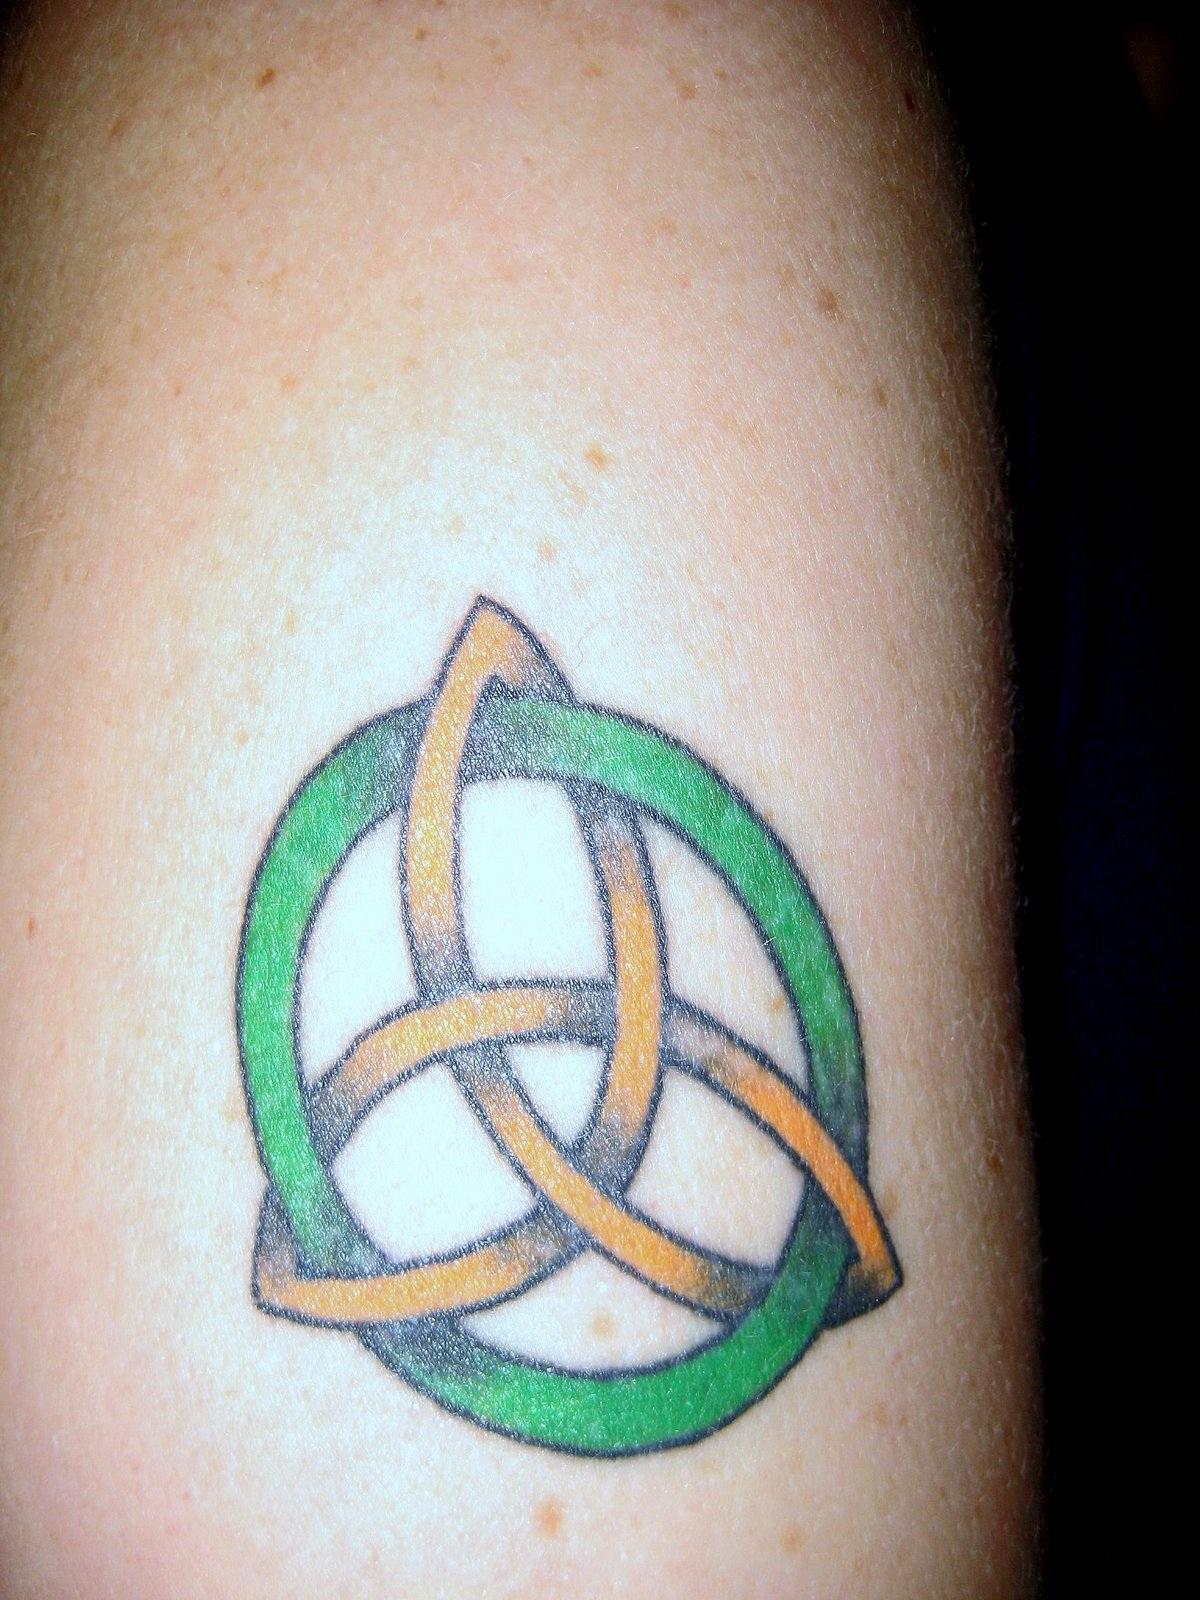 Irish Tattoos Designs, Ideas and Meaning - Tattoos For You